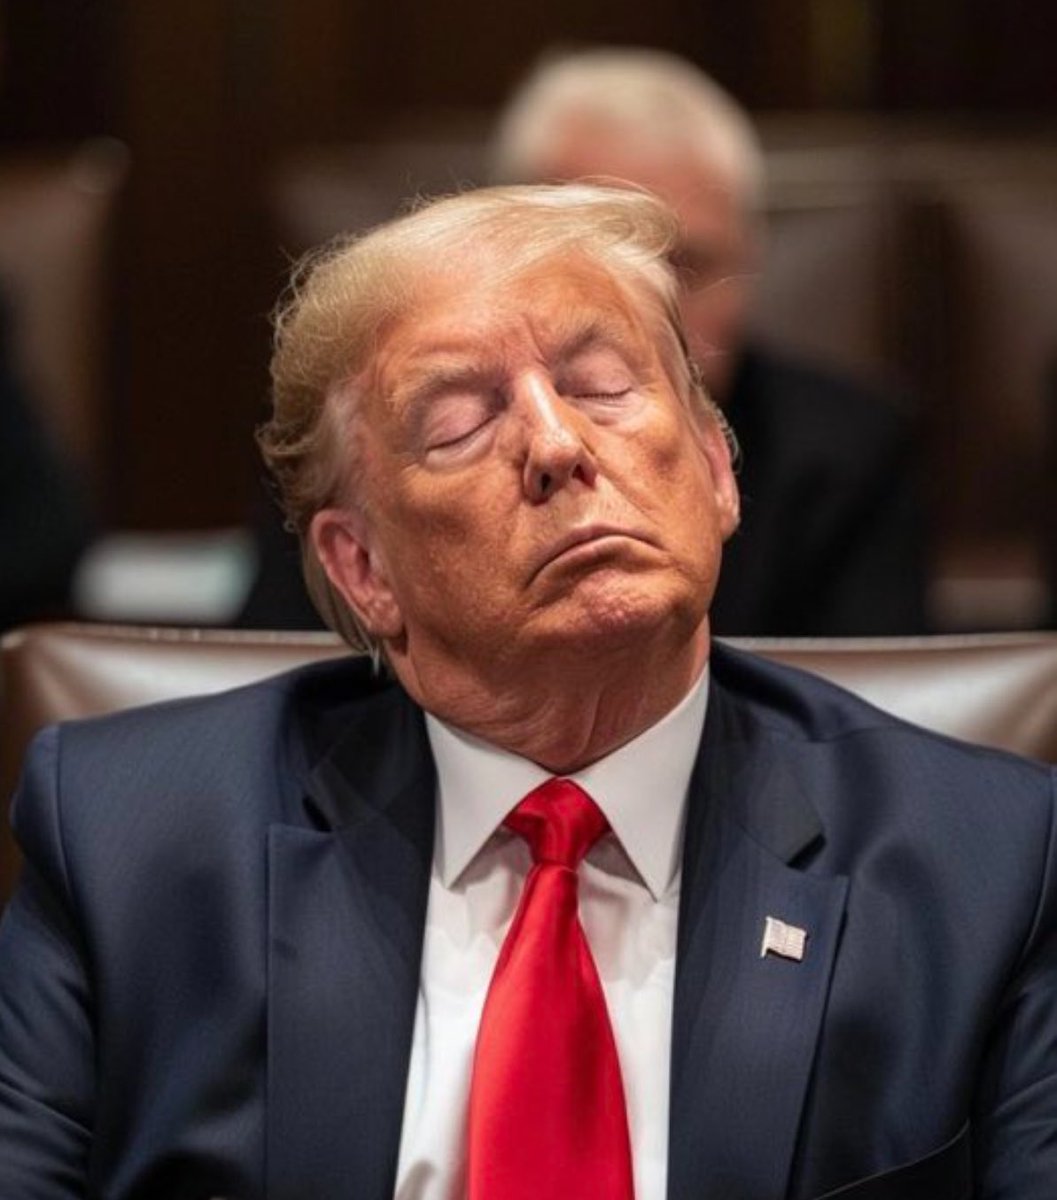 So this is the man who calls President Biden “Sleepy Joe”. What would you call Donald Trump after his first day in criminal court?